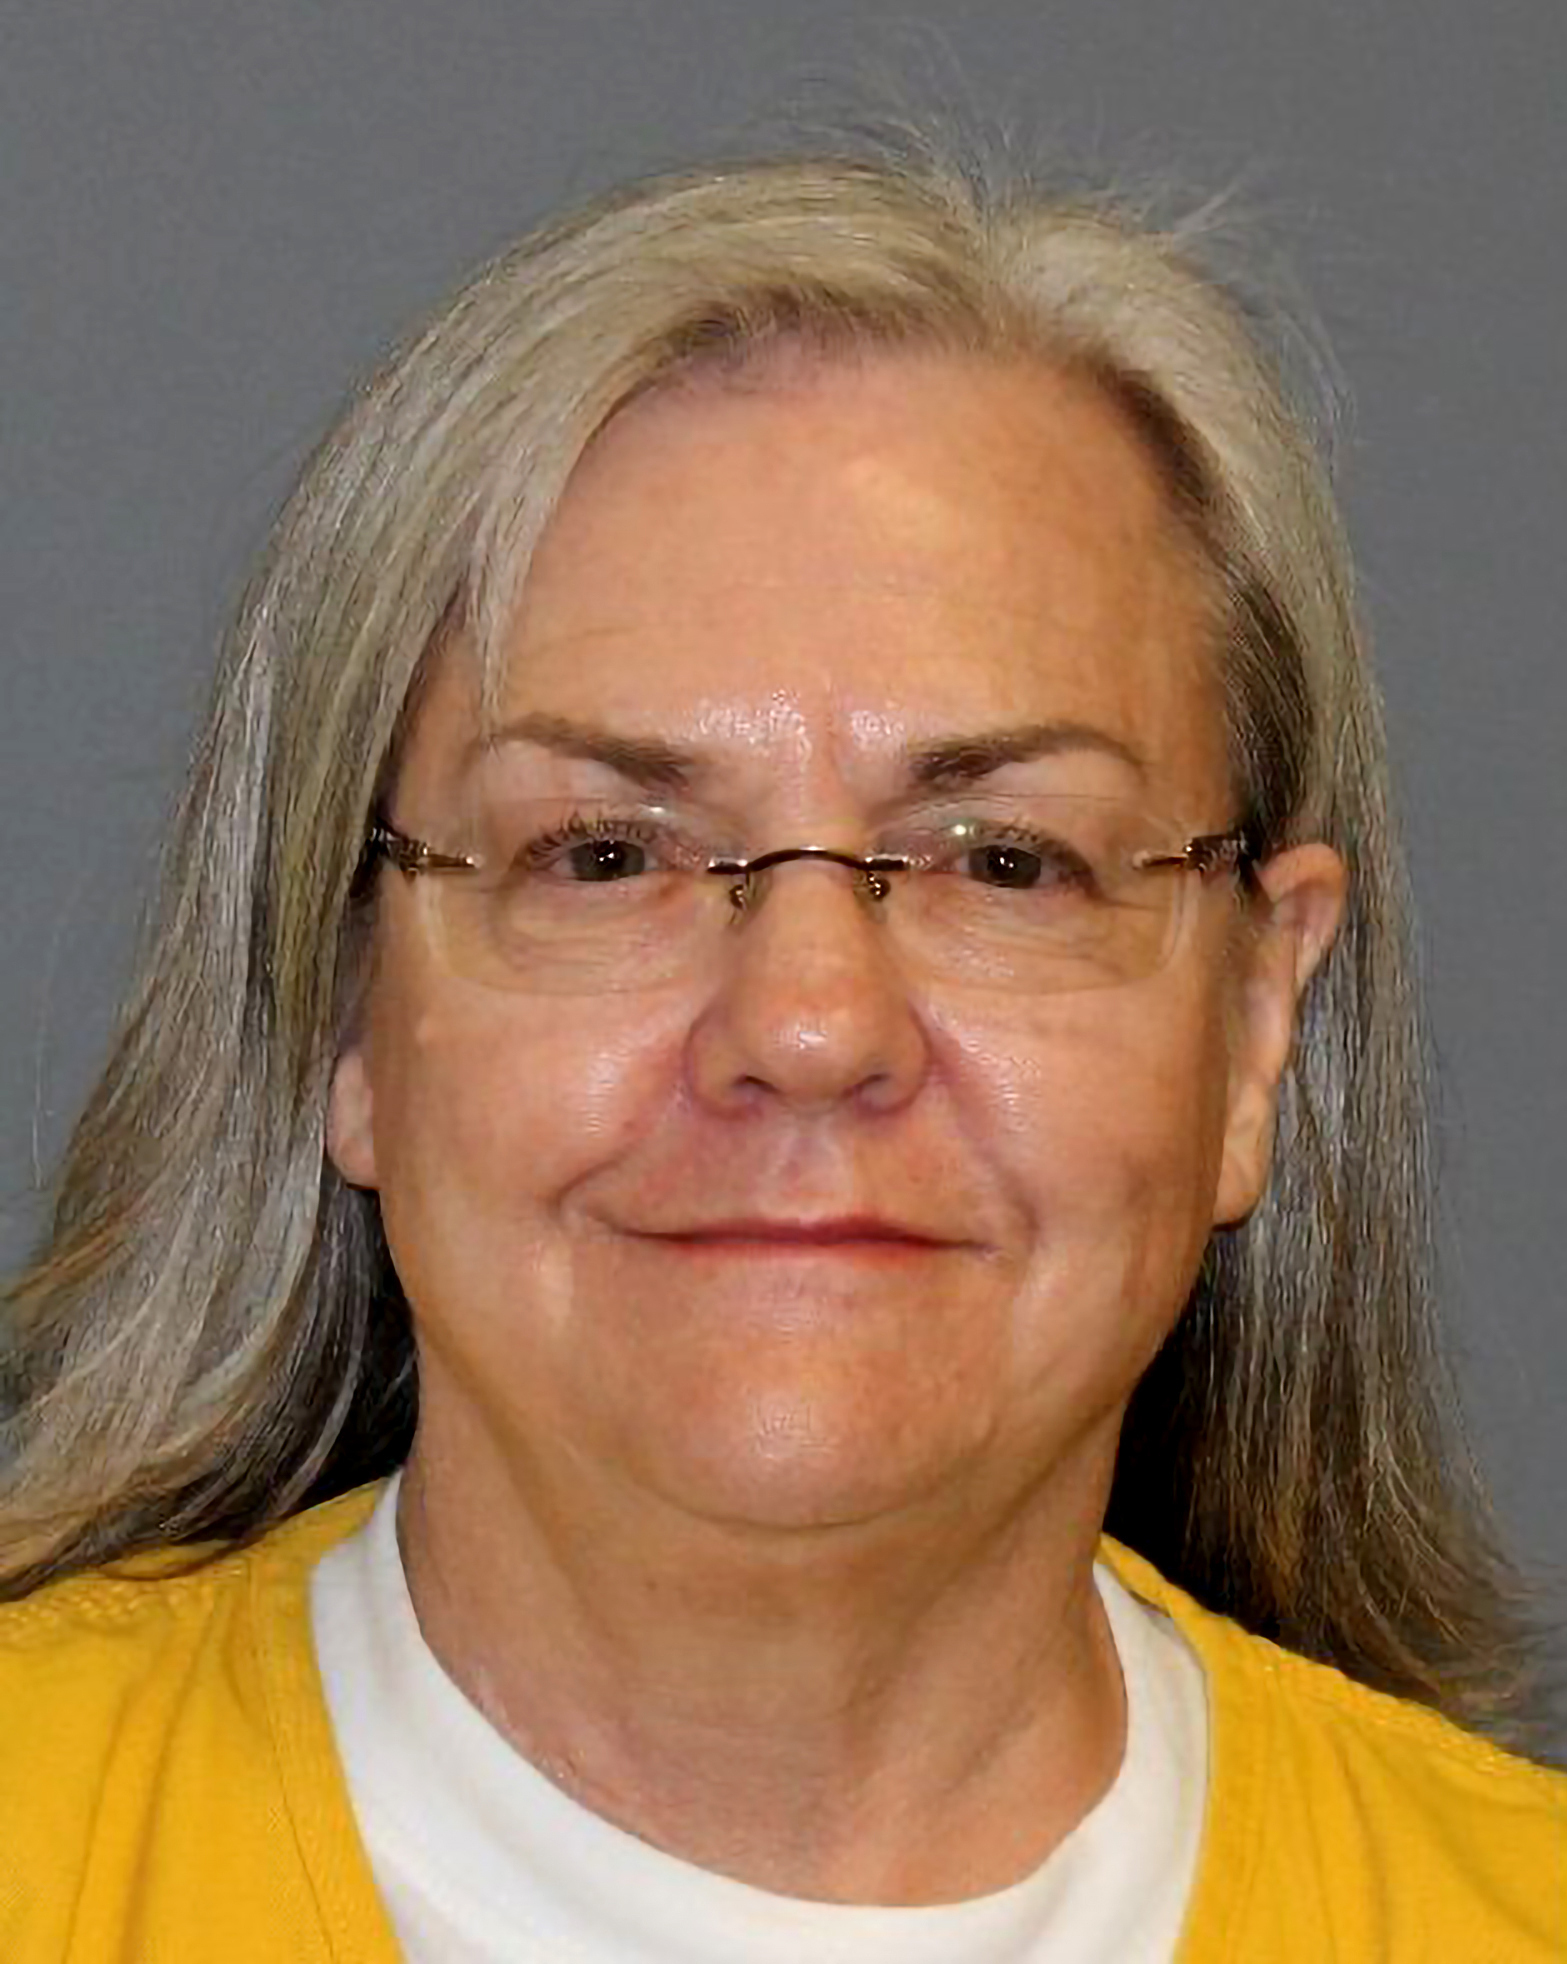 Mesa County Deputy Clerk Belinda Knisley reached a plea deal to testify against Mesa County Clerk Tina Peters after being charged with breaking into her county's voting machines.